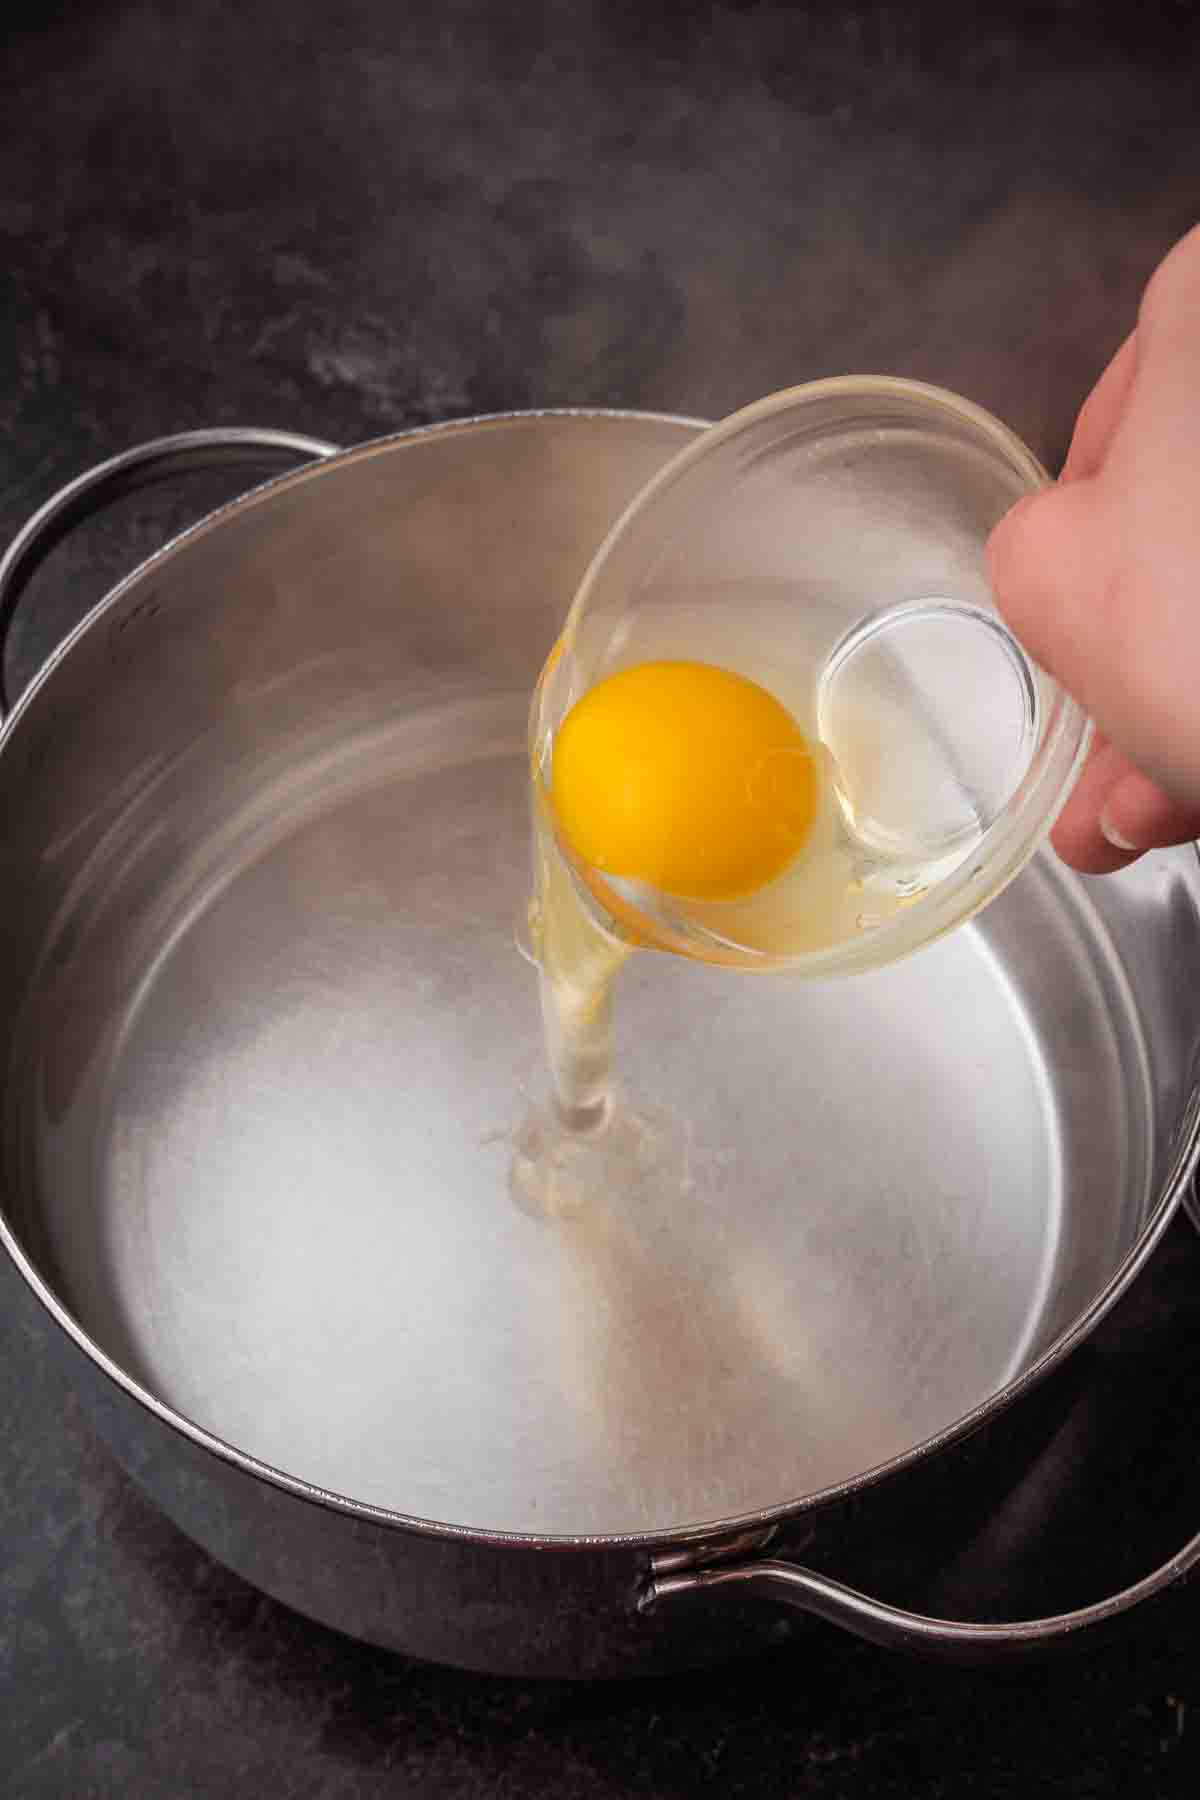 Egg yolk being dropped into hot water